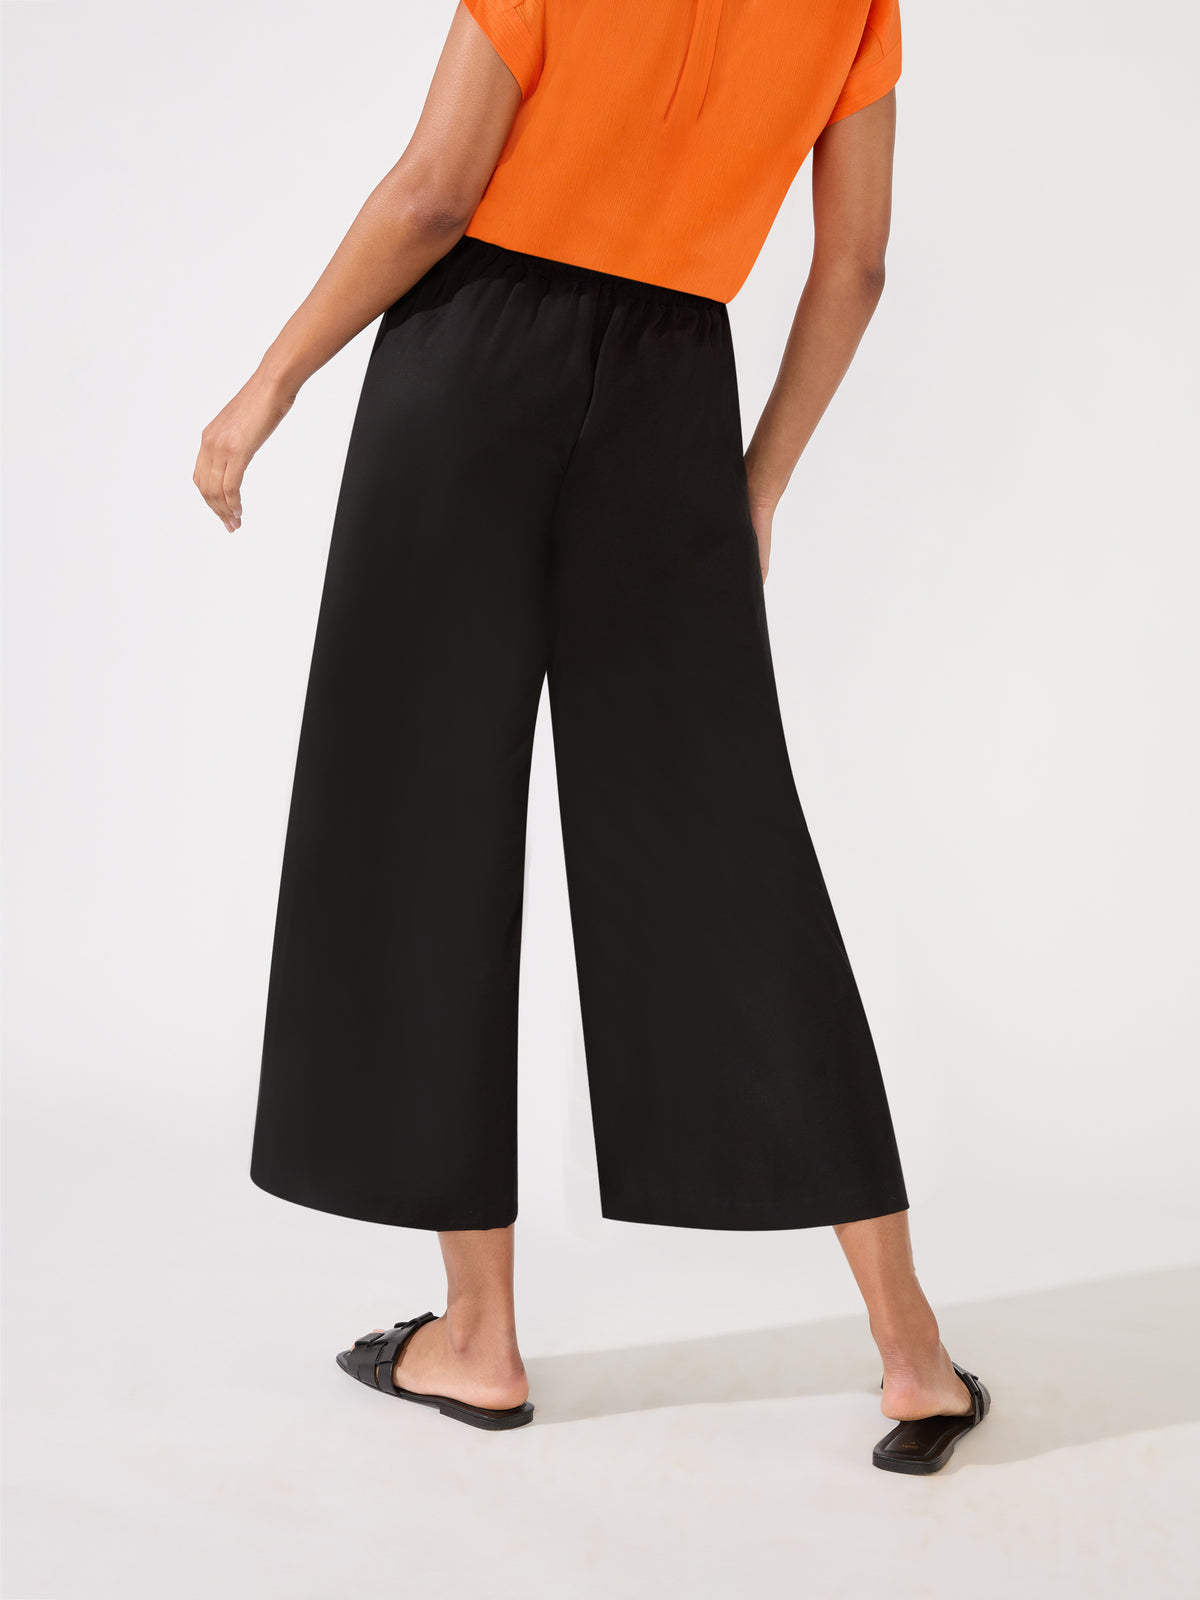 Petite Black Pull On Culotte Trousers